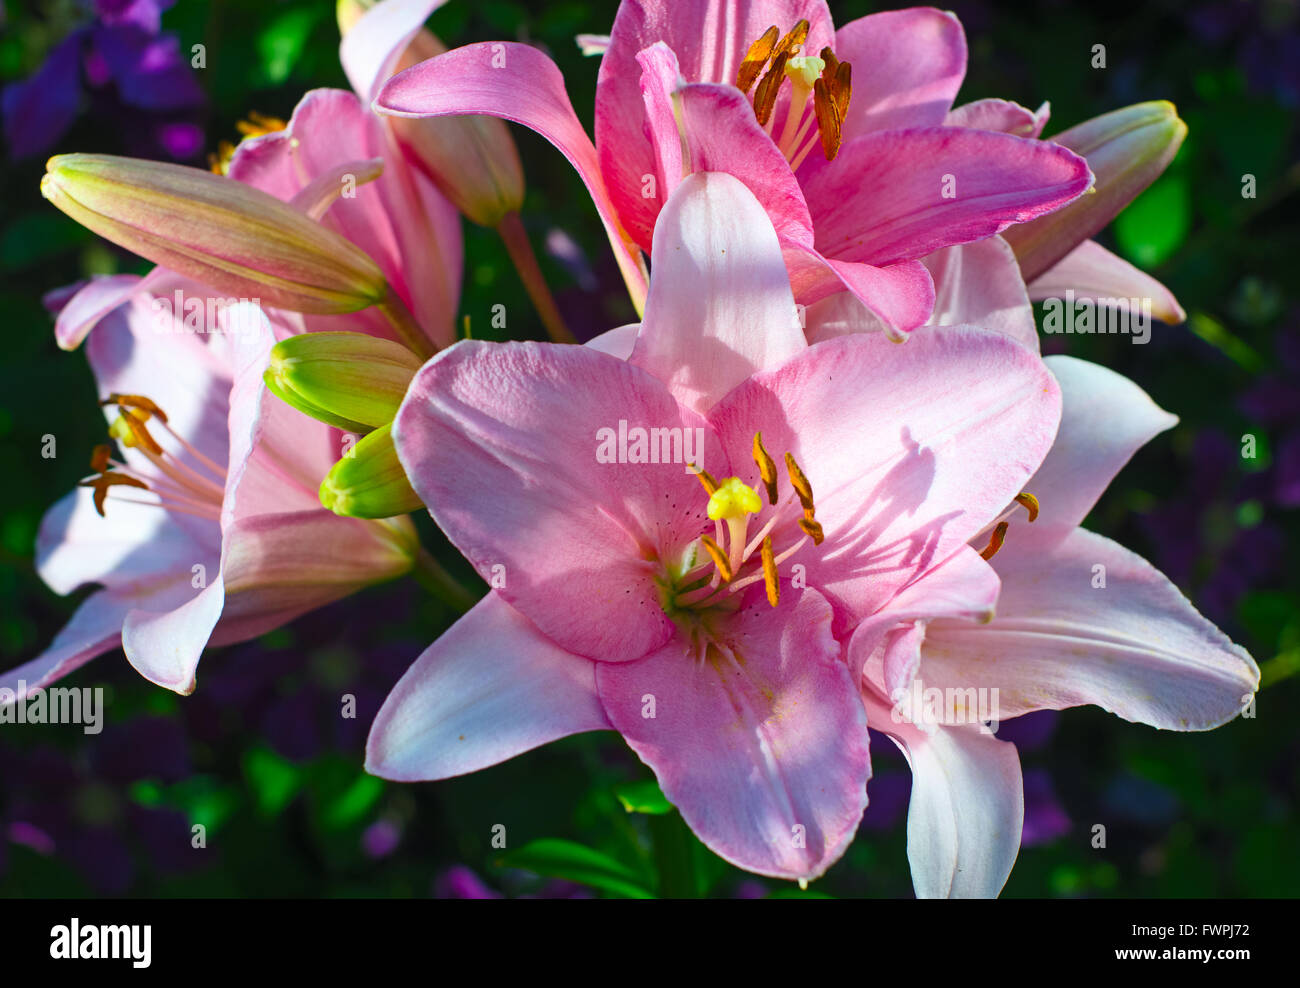 light pink flowers of a lily on an indistinct dark background Stock Photo